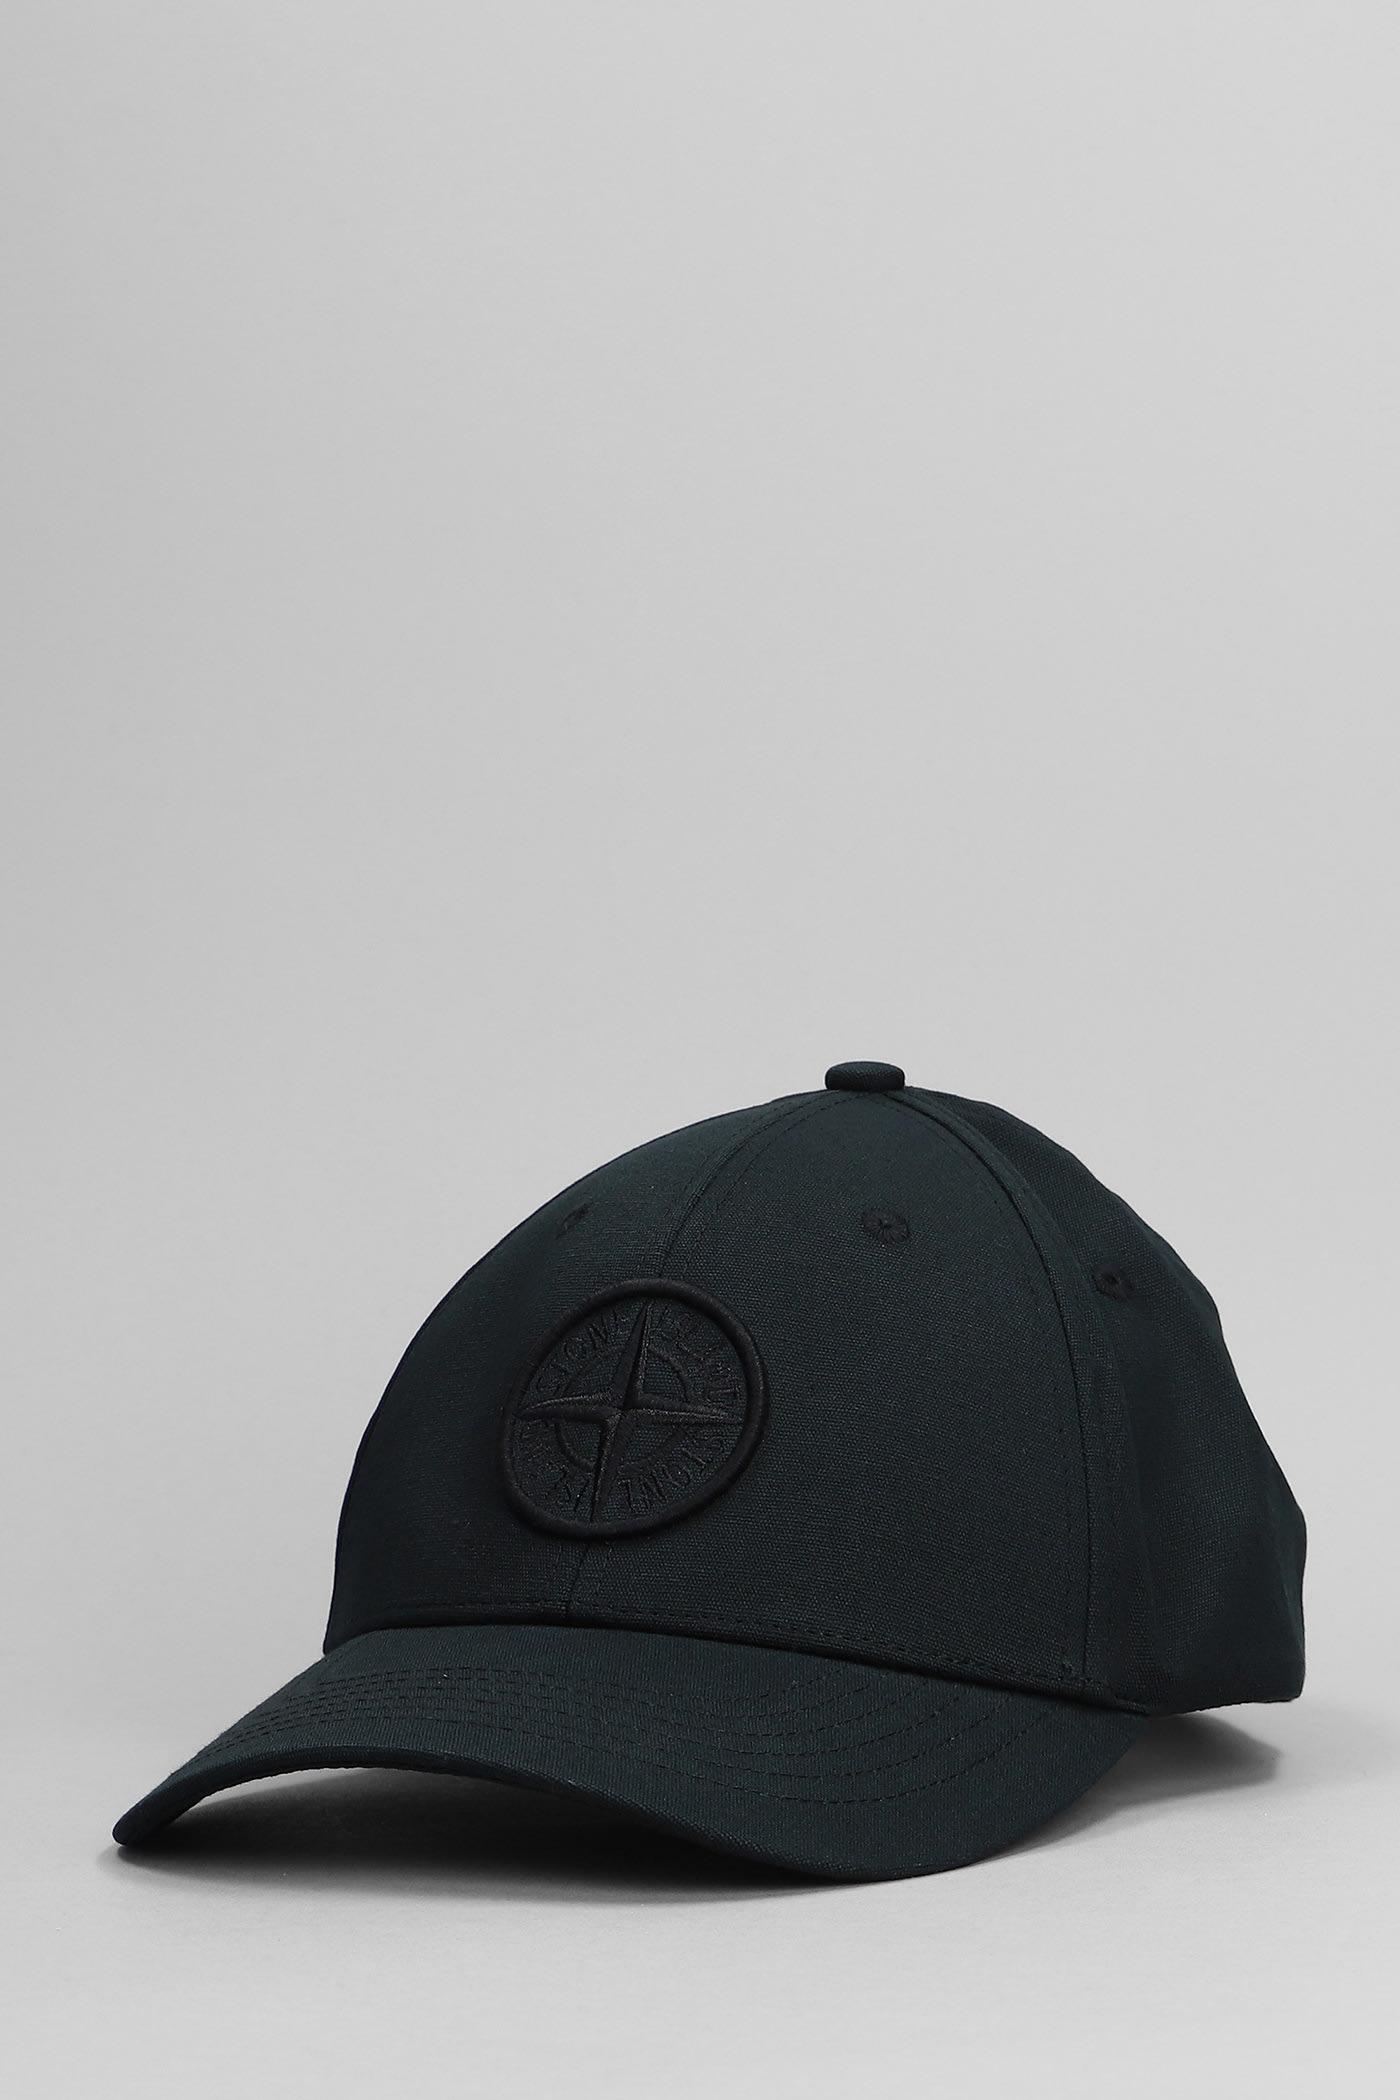 Stone Island Hats In Black Cotton for Men | Lyst